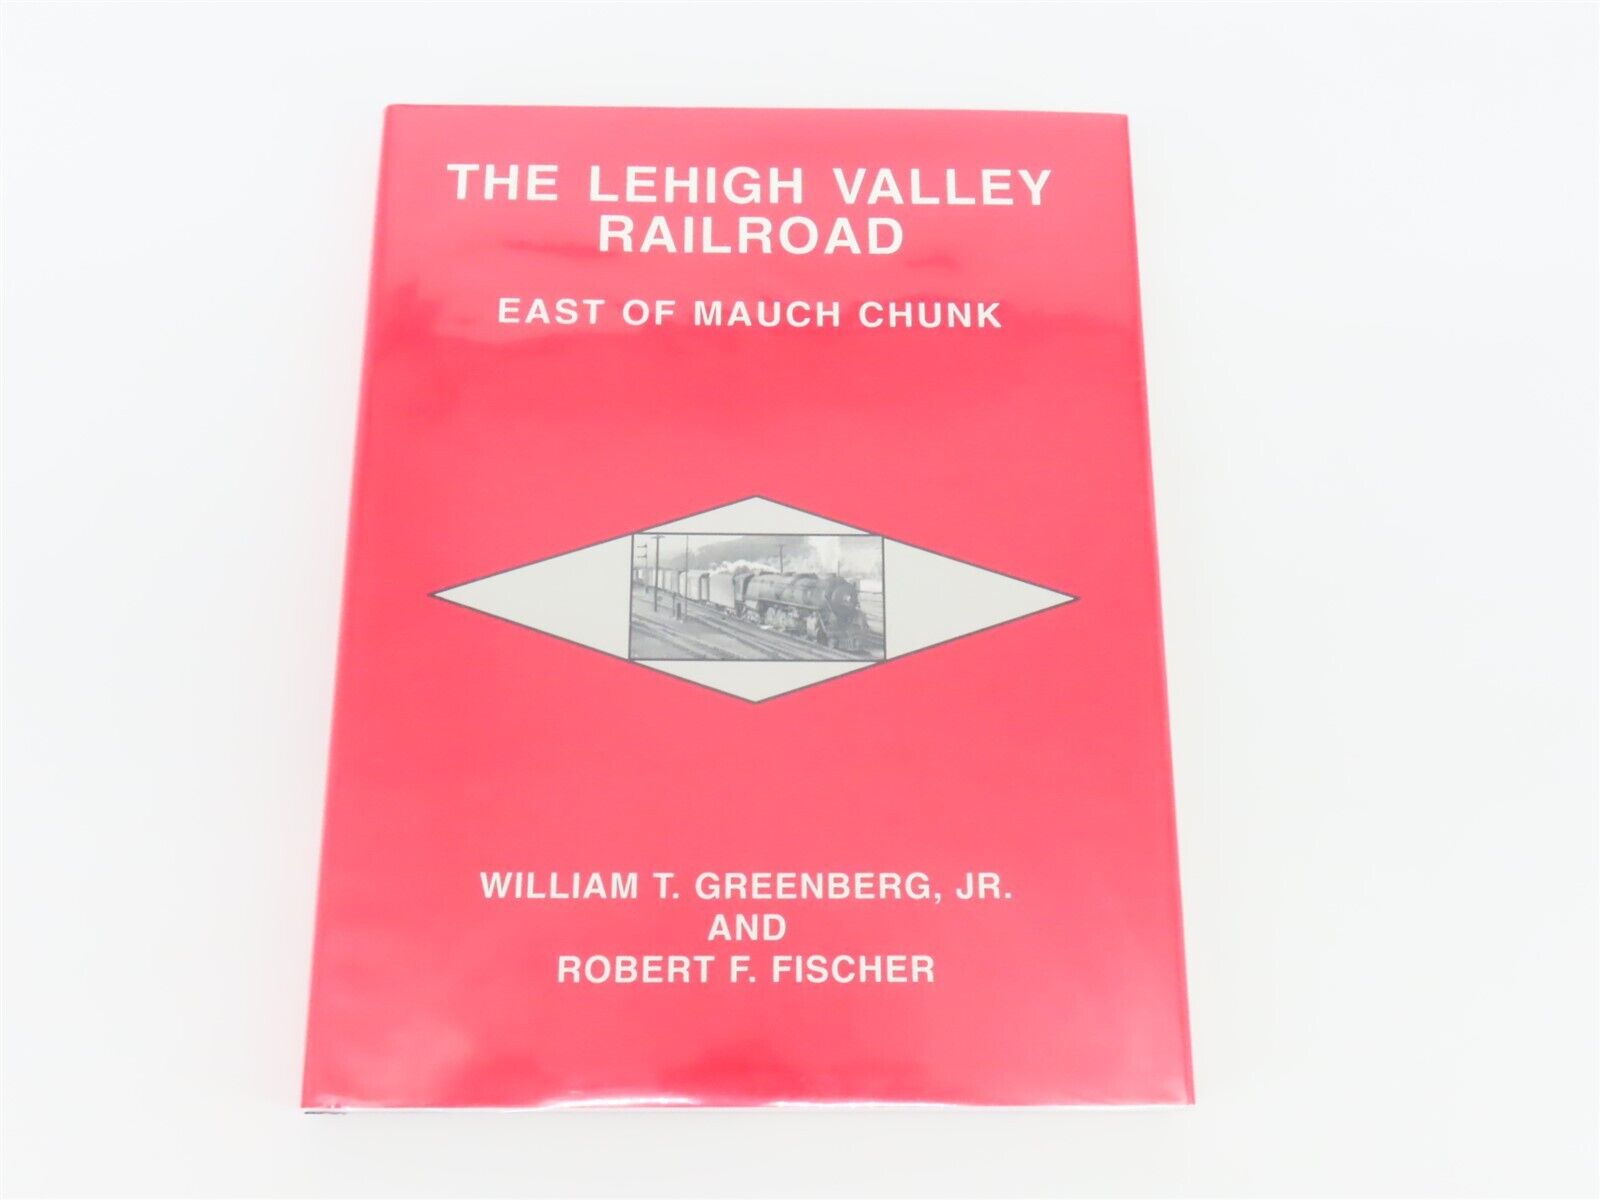 The Lehigh Valley Railroad: East Of Mauch Chunk by Greenberg & Fischer ©1997 HC 